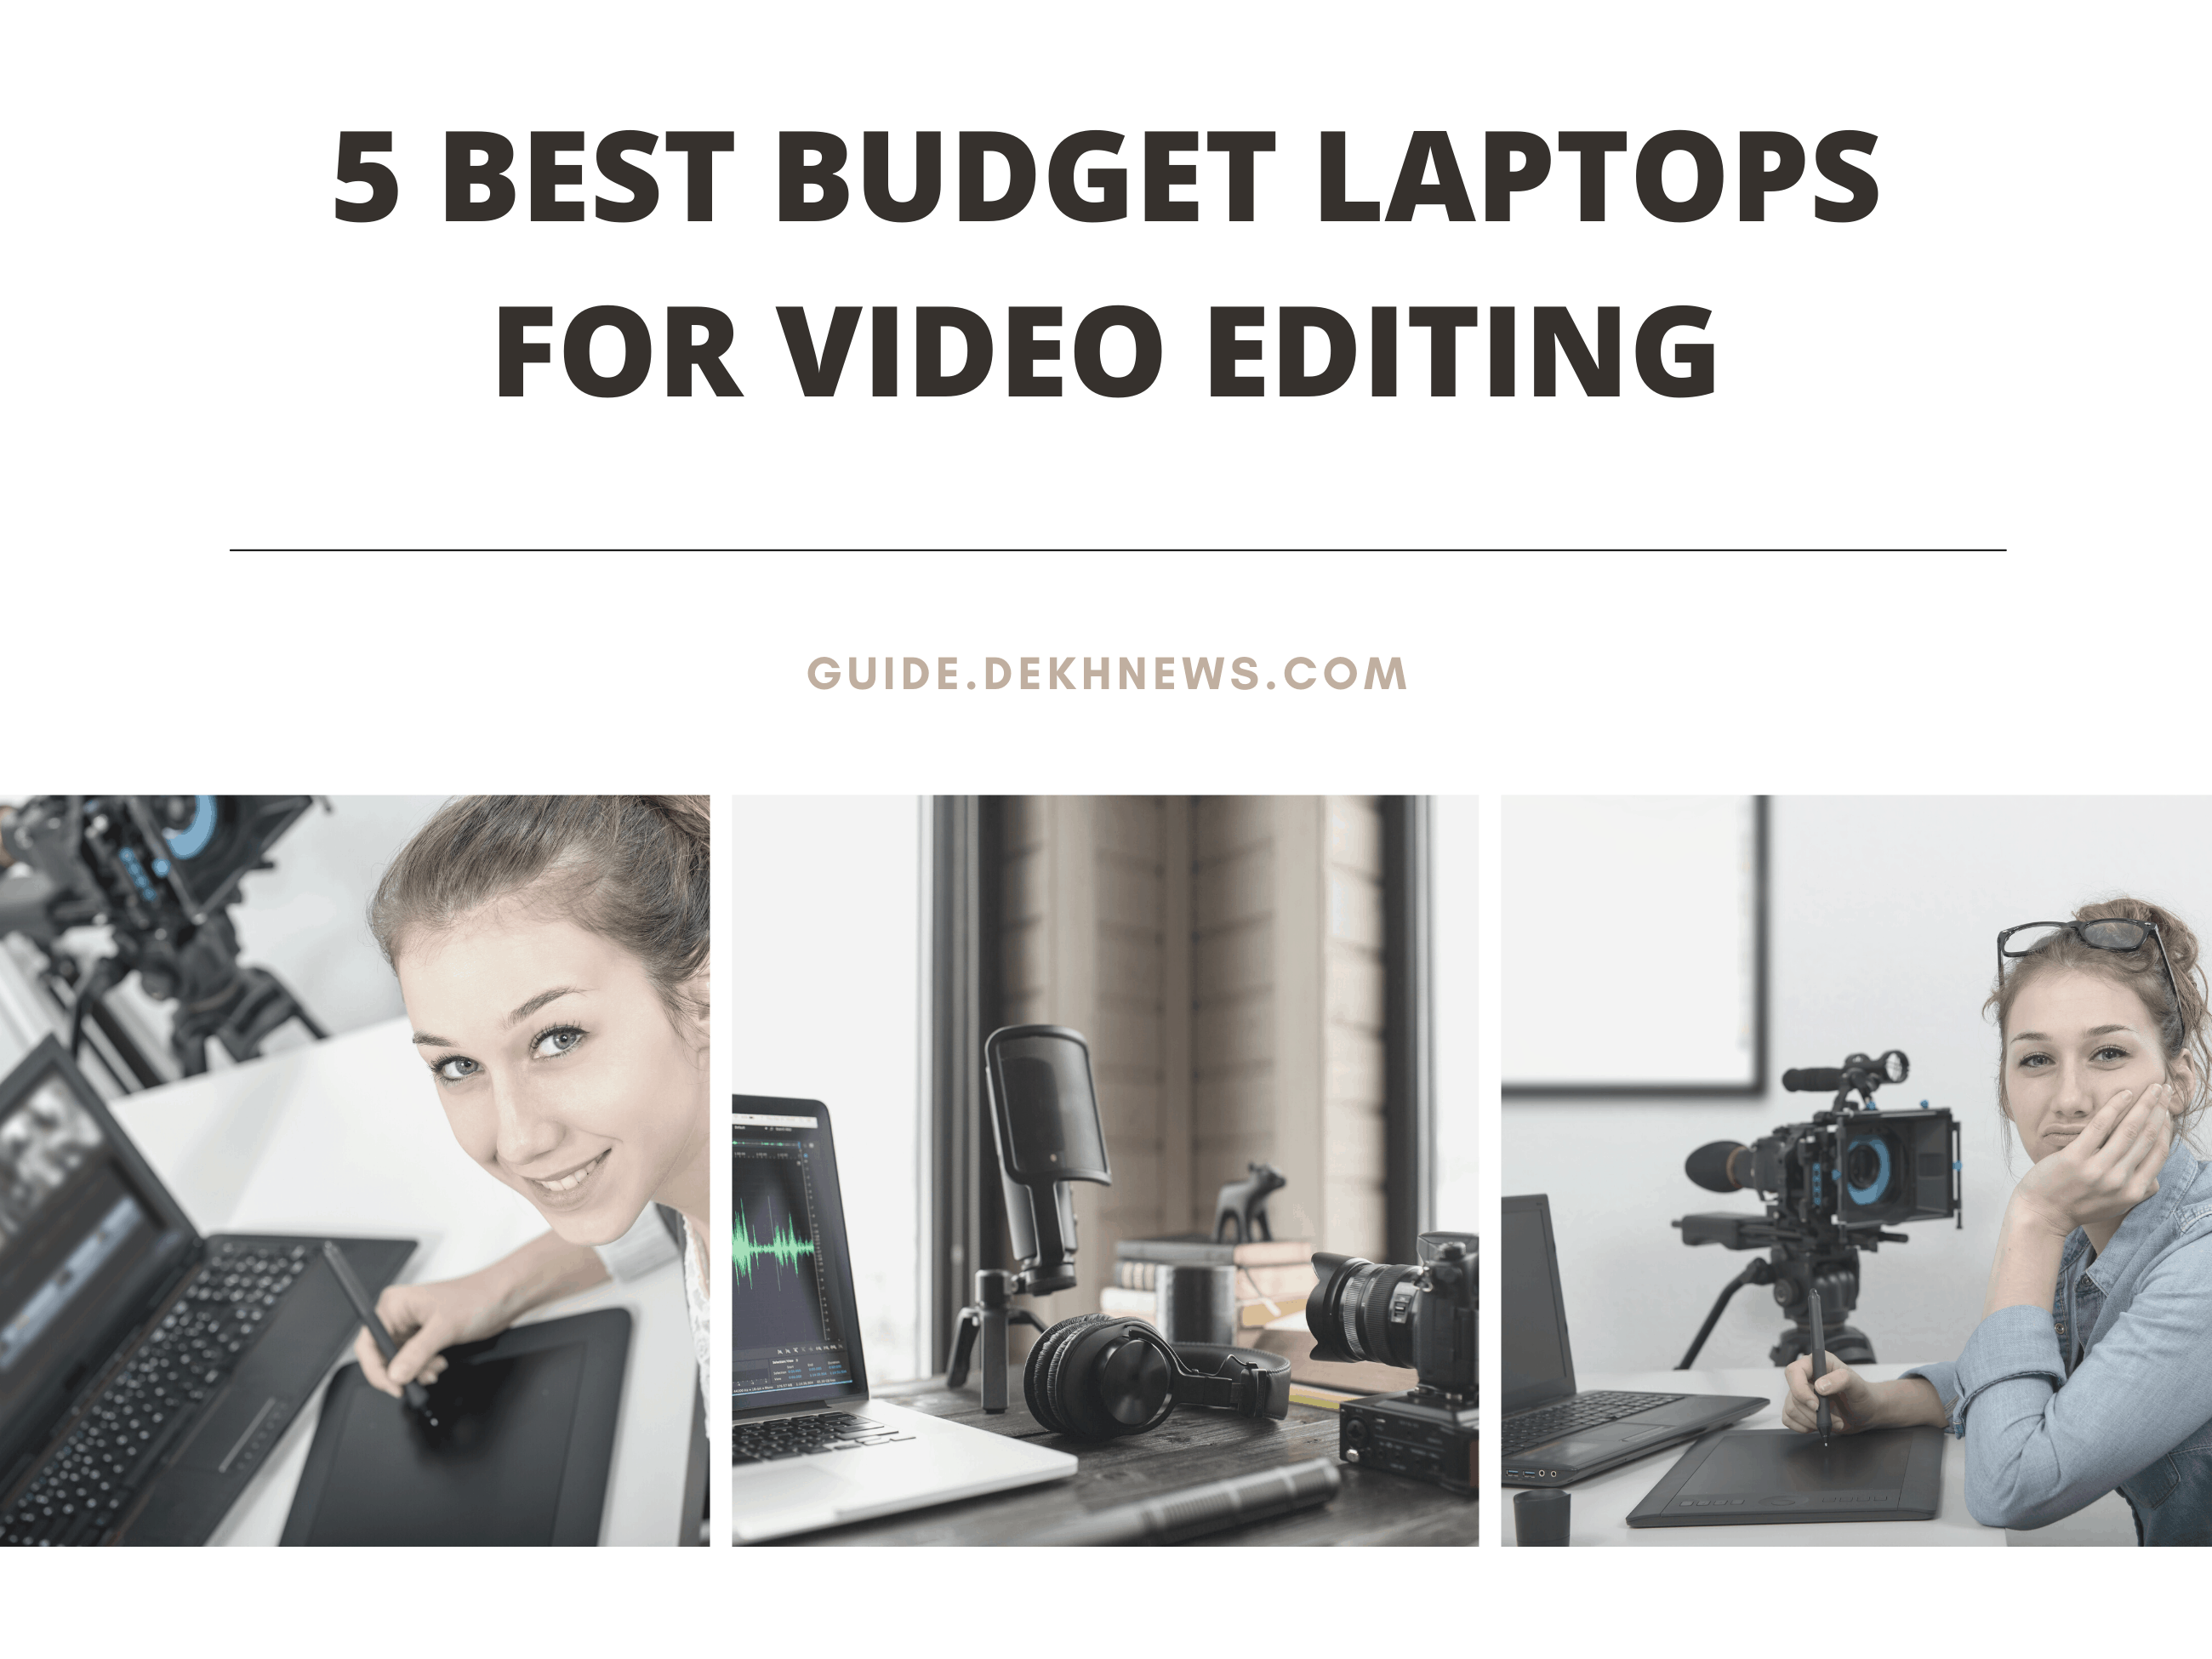 5 Best Budget Laptops for Video Editing